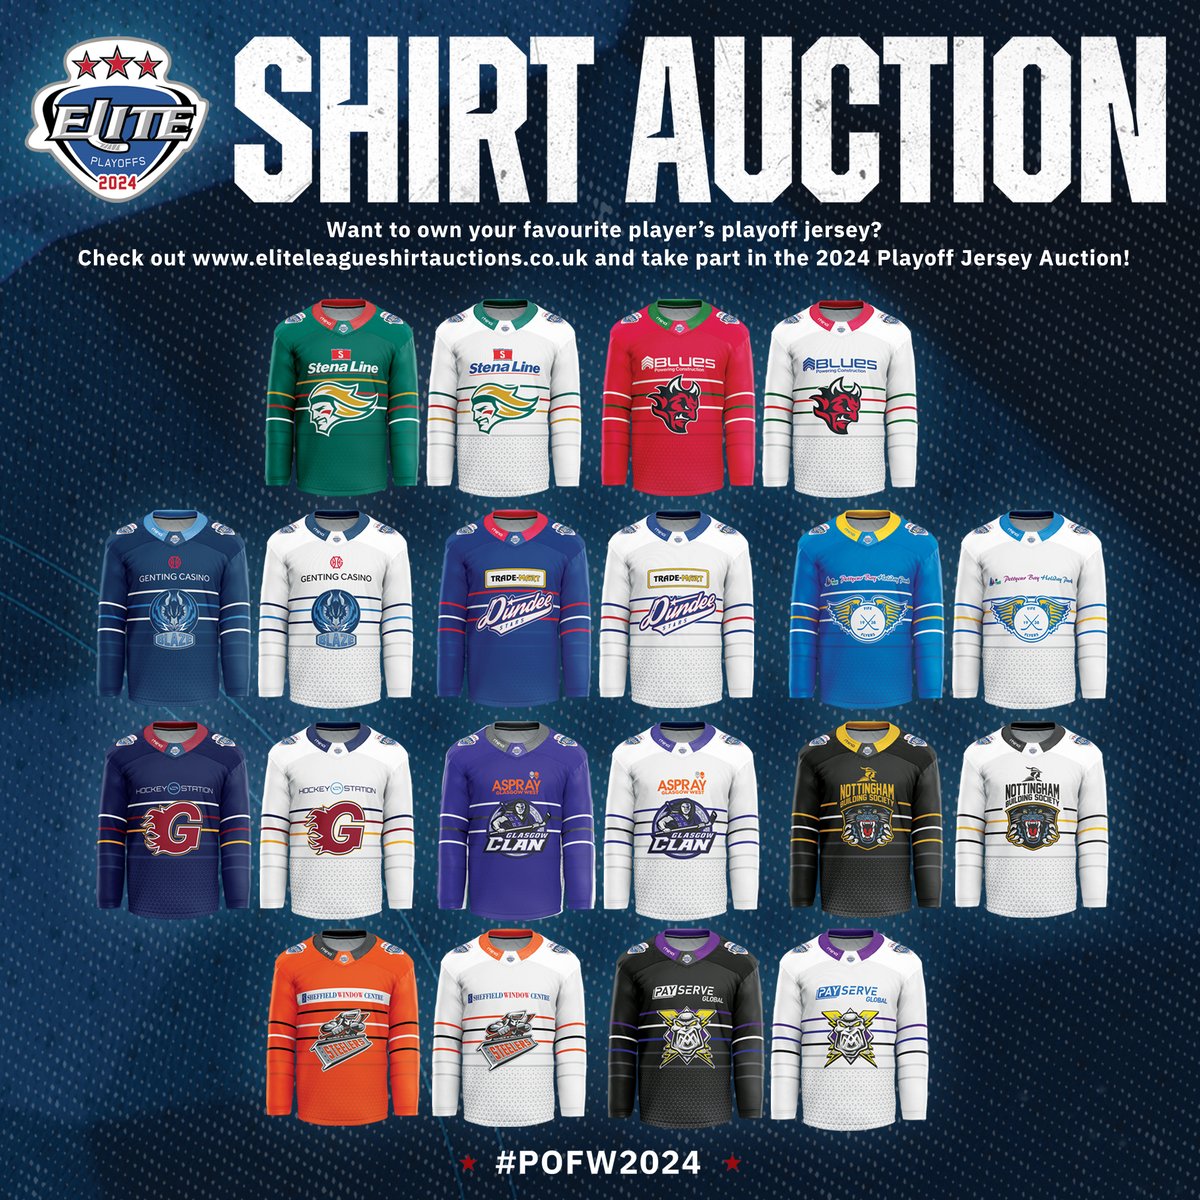 👕 | Playoff Jersey Auction 𝙀𝙉𝘿𝙎 𝙏𝙊𝙉𝙄𝙂𝙃𝙏 Don't miss out on the chance to own a Glasgow Clan Playoff Jersey💜 Bidding closes at 8pm on Tuesday 30th April 2024. 🔗➡️ bit.ly/3mItczS